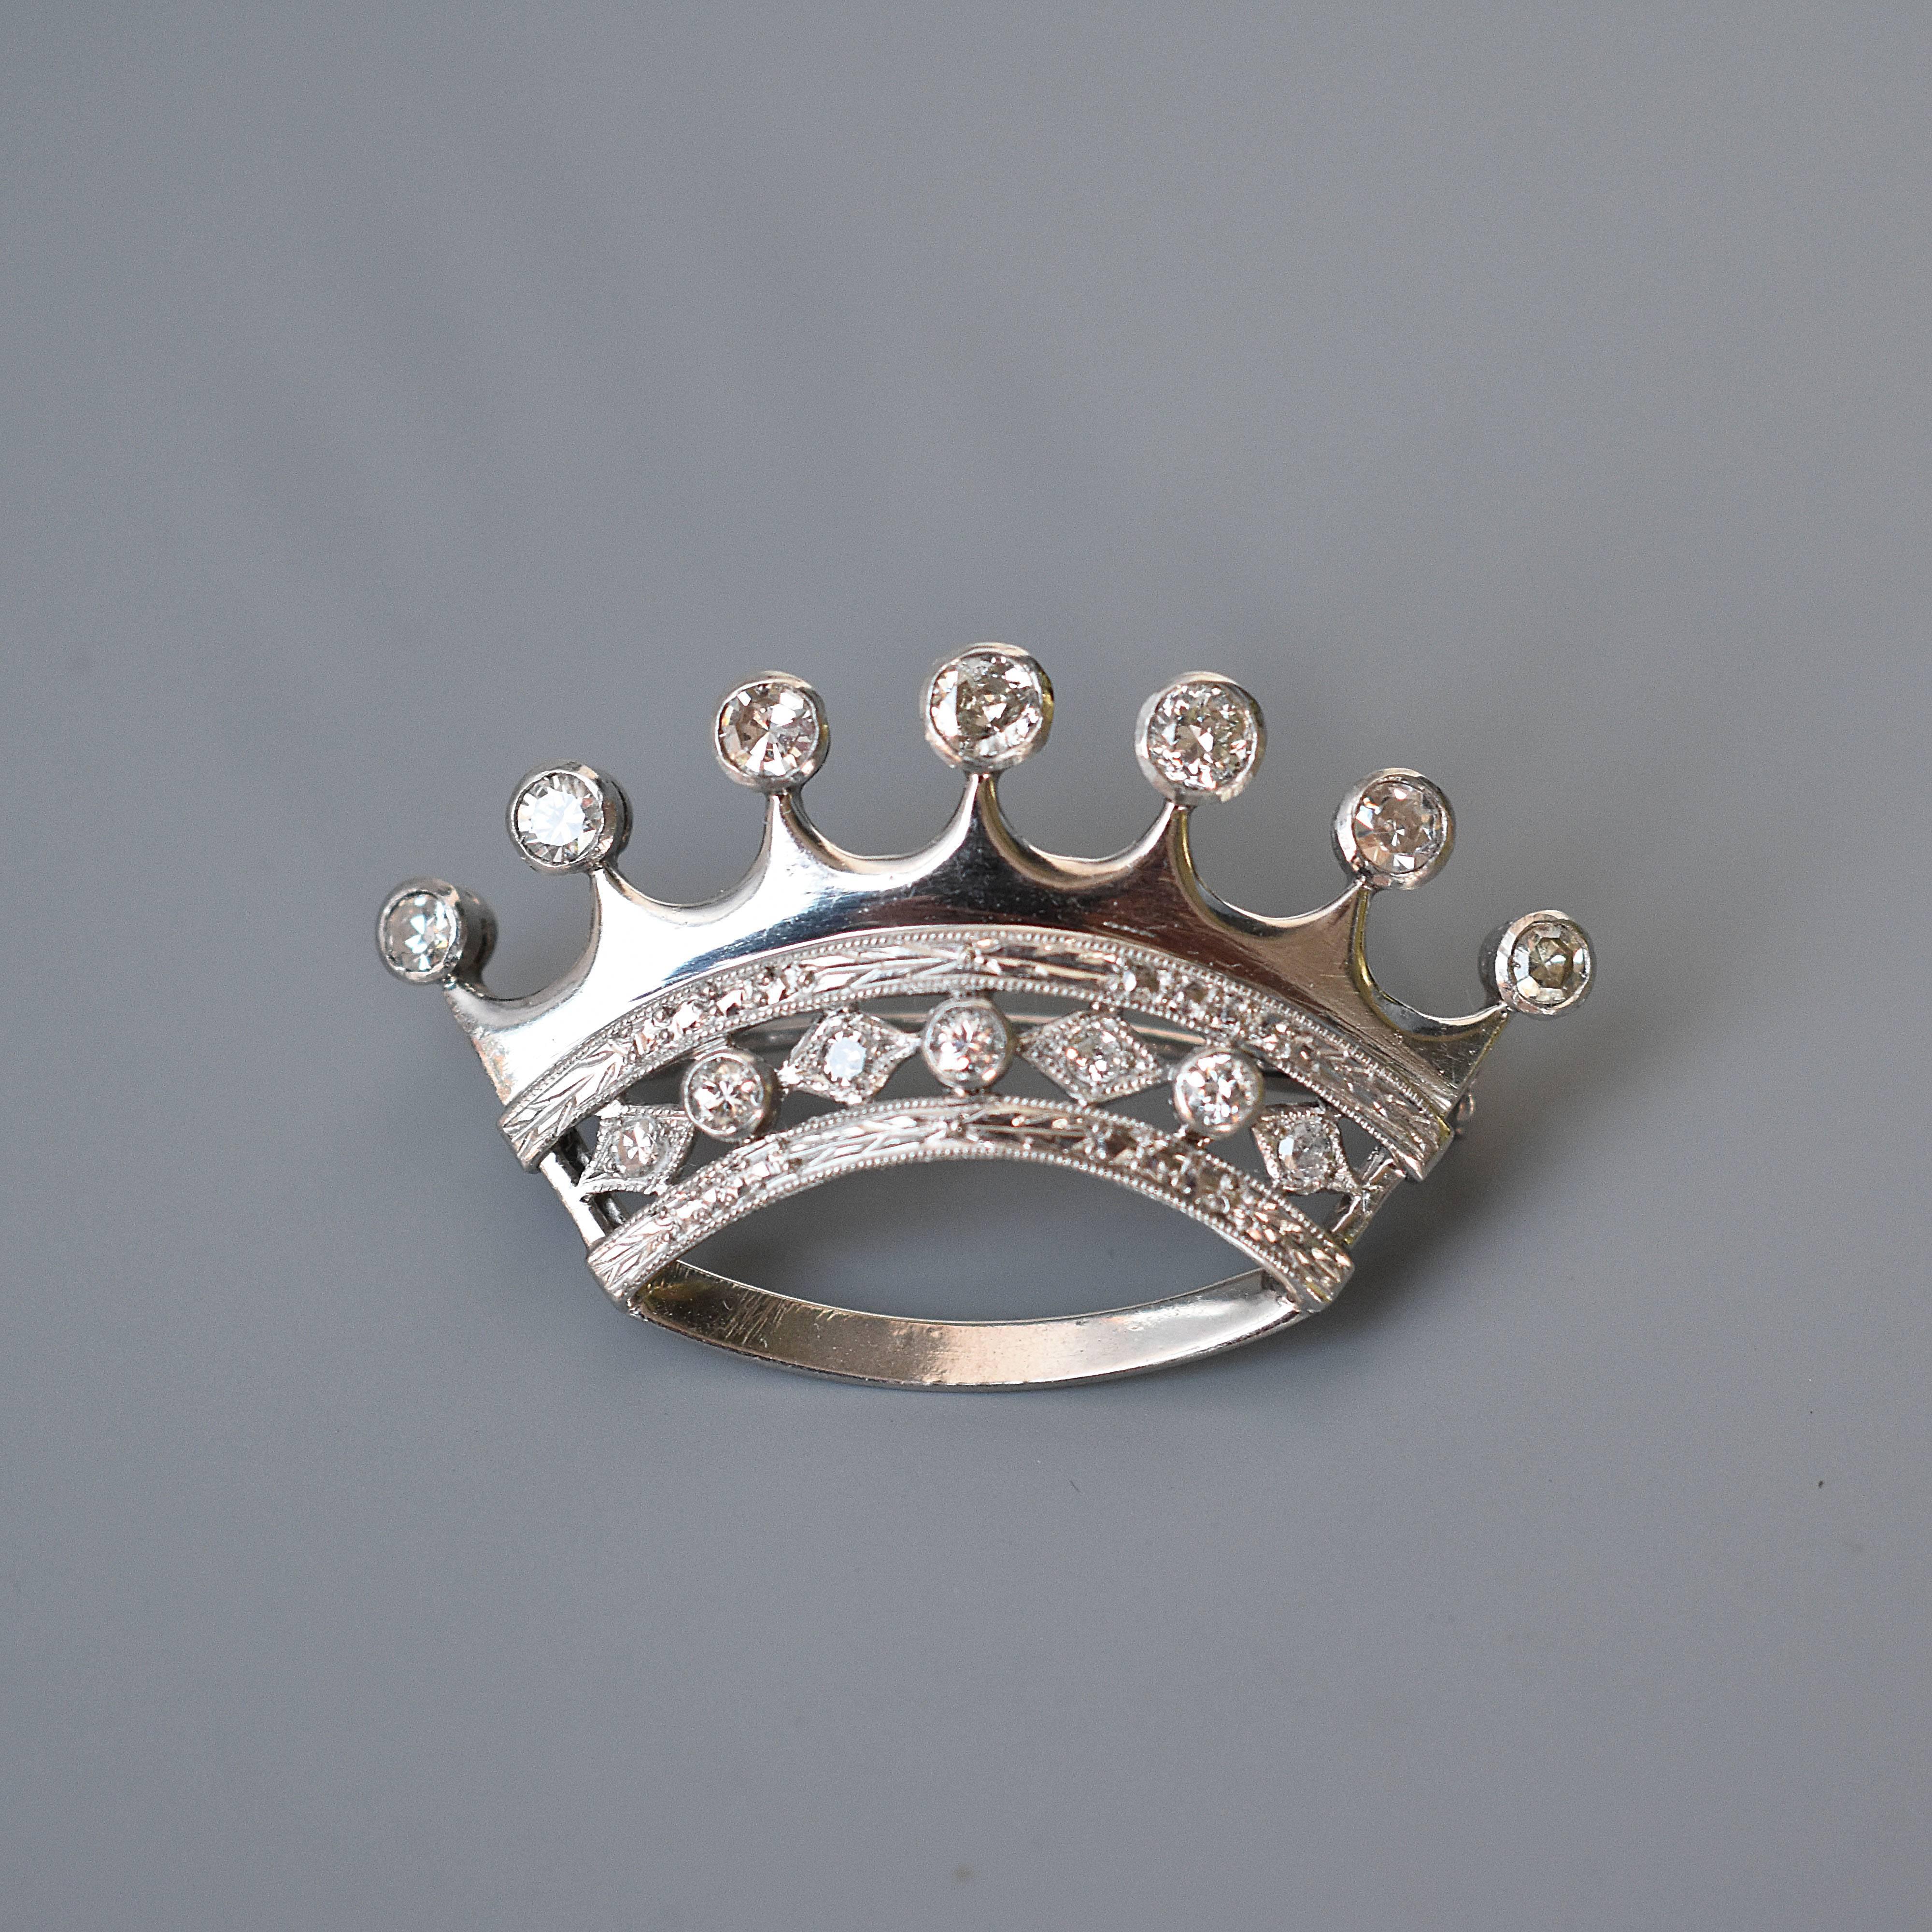 Italian 18-Karat Brooch in White Gold and Diamonds, Crown-Shaped Pins